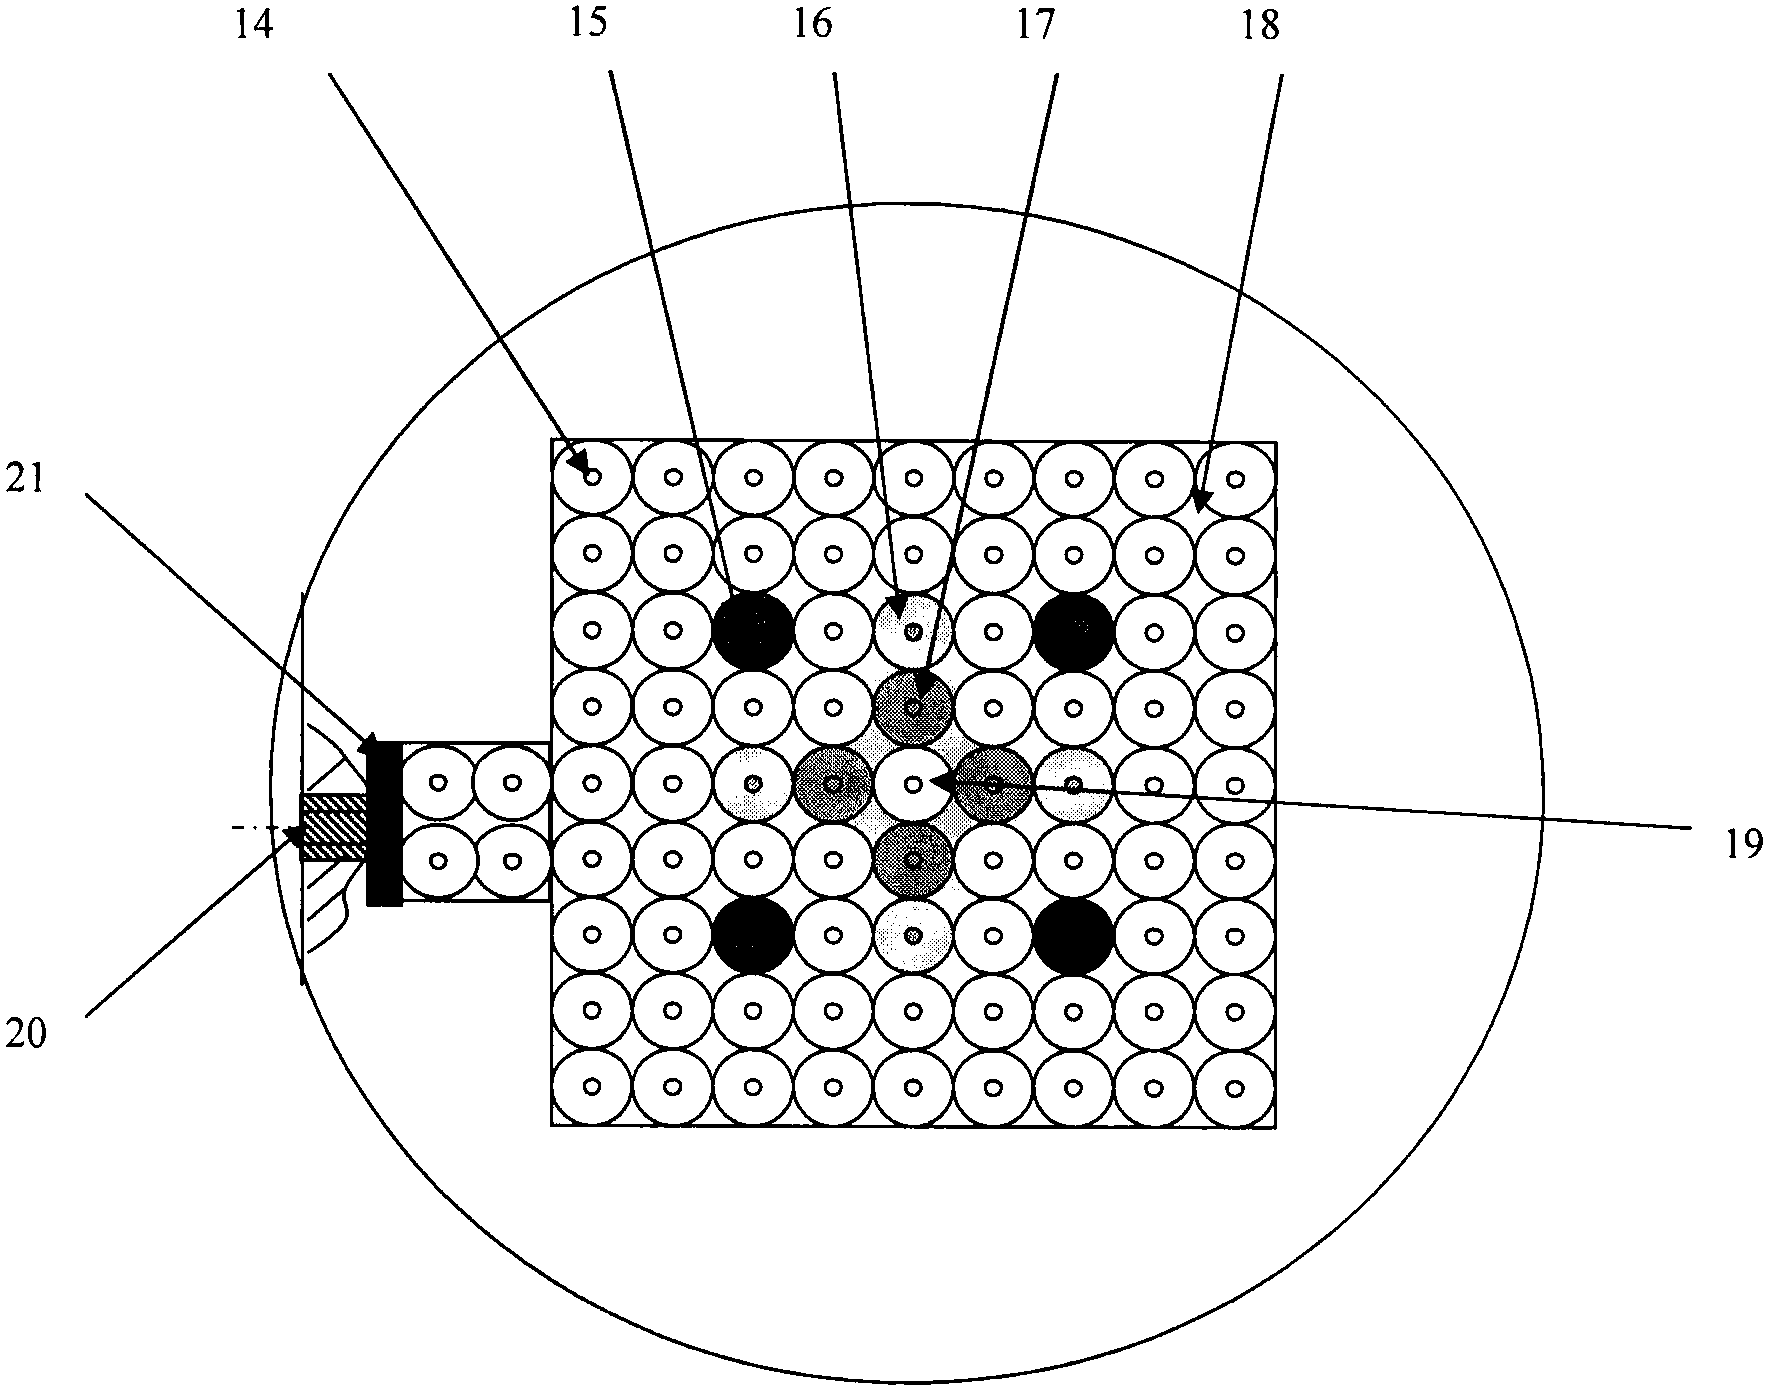 Calibration target for optical axis calibration of multi-band multi-optical axis photoelectric system